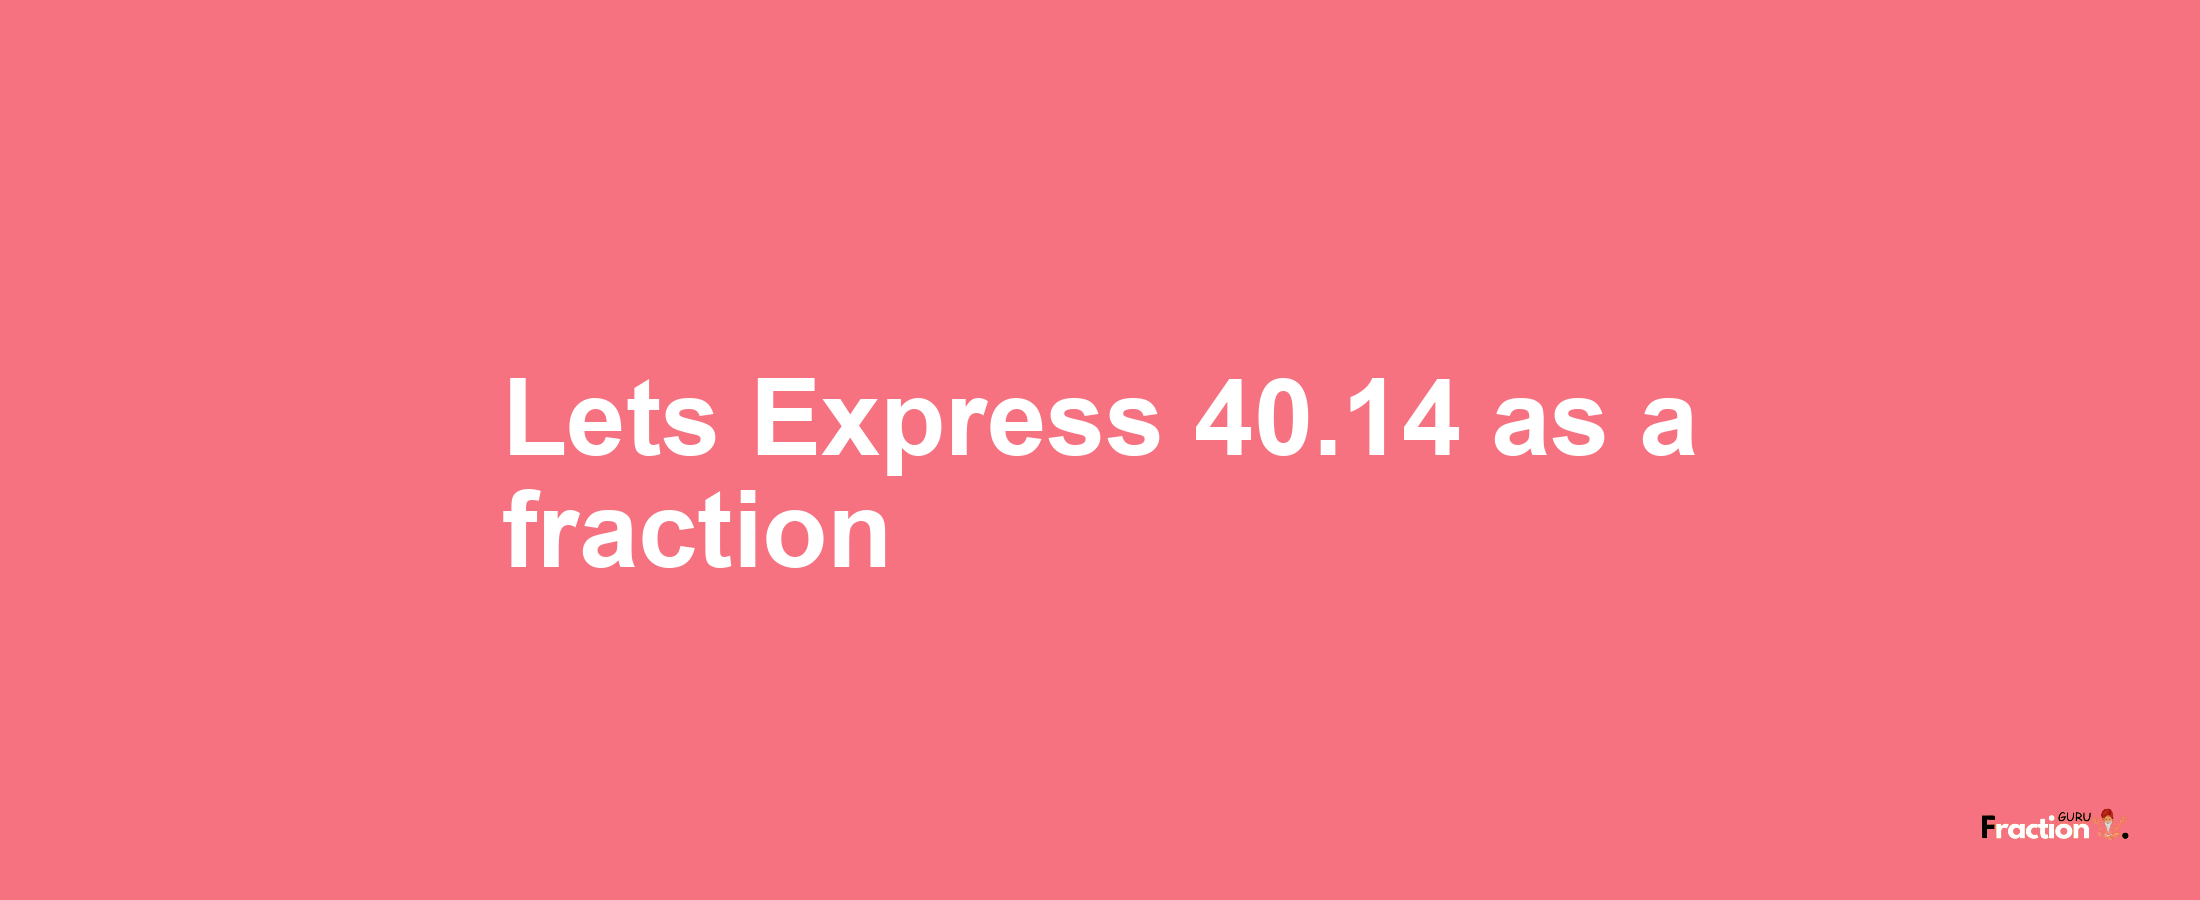 Lets Express 40.14 as afraction